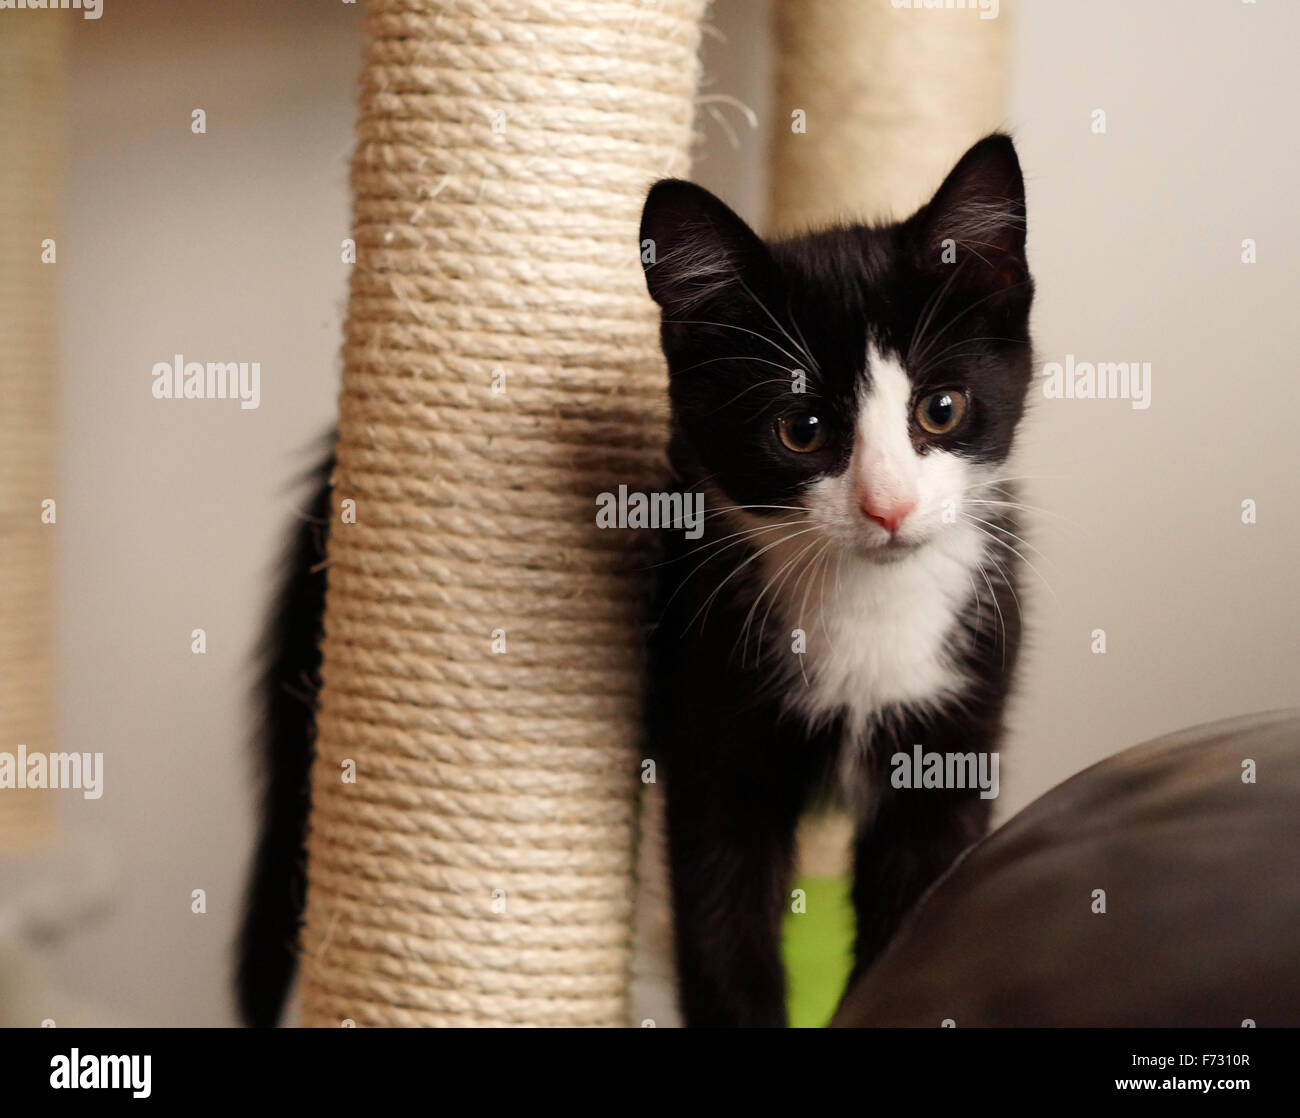 Black And White Cute Fluffy Kitten With Green Eyes Looking At Camera Stock Photo Alamy,How To Make Dove Jalapeno Poppers